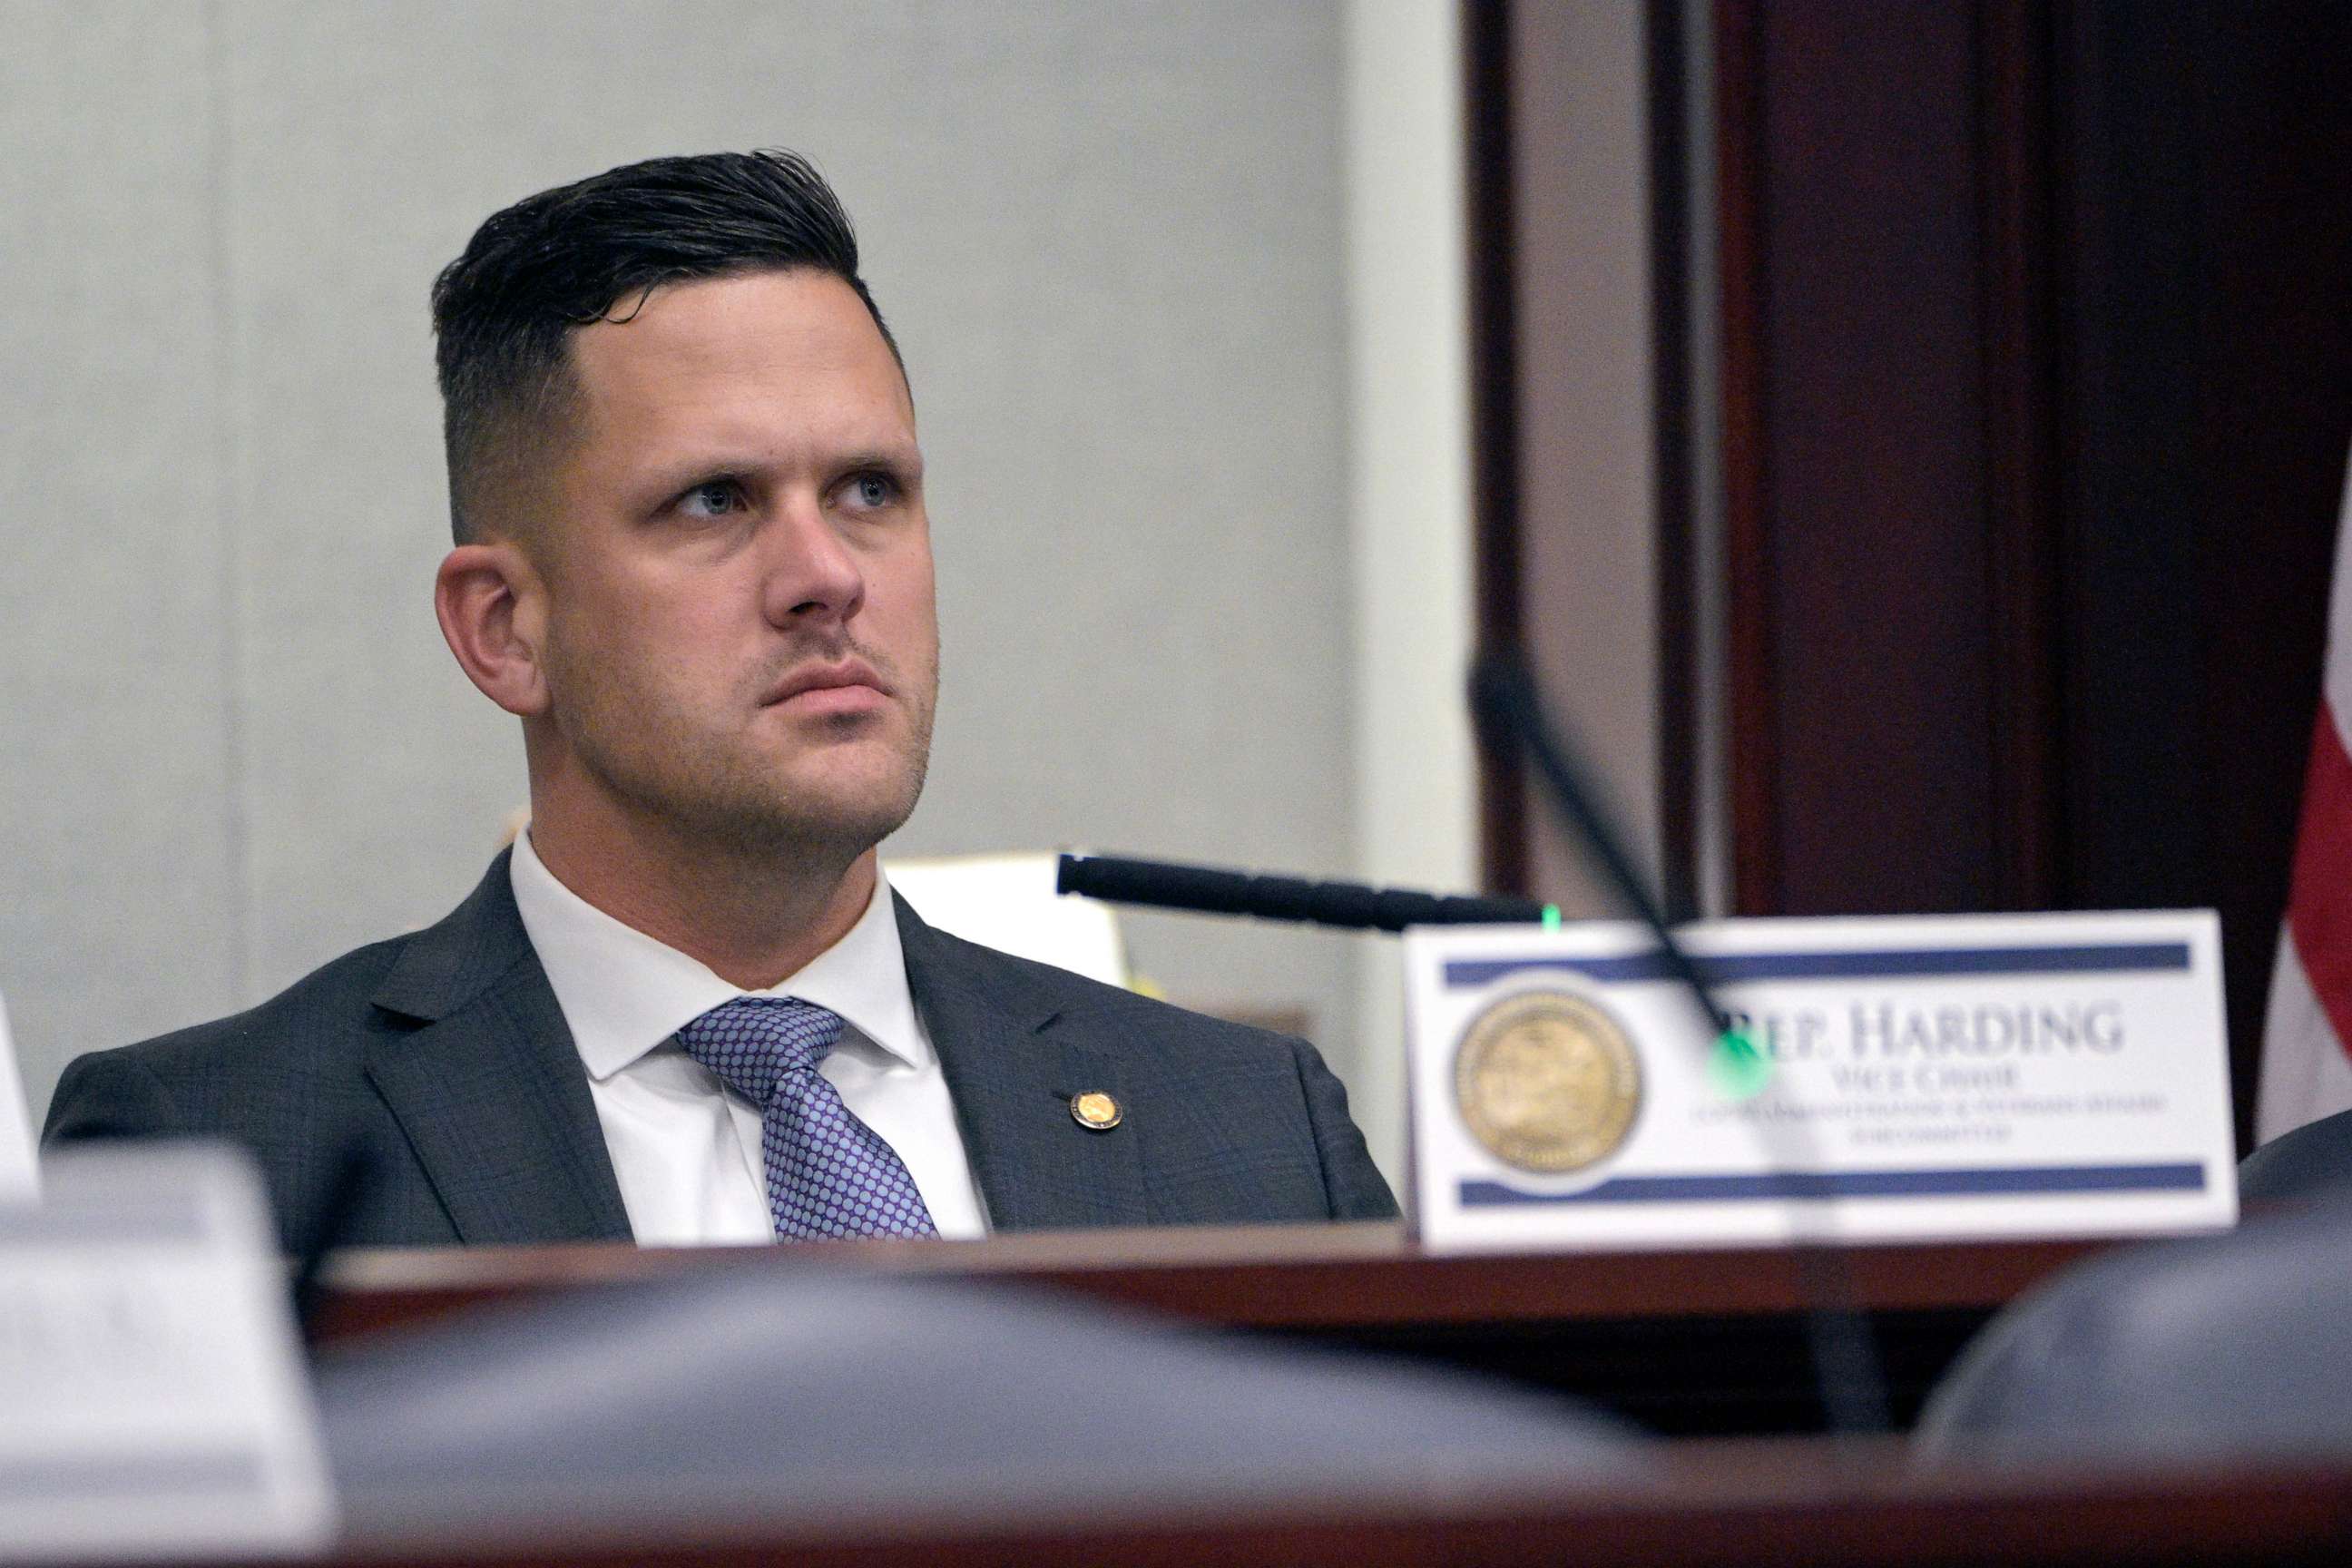 PHOTO: Florida state Rep. Joe Harding listens during a Local Administration and Veterans Affairs Subcommittee hearing in a legislative session on Jan. 13, 2022, in Tallahassee, Fla.